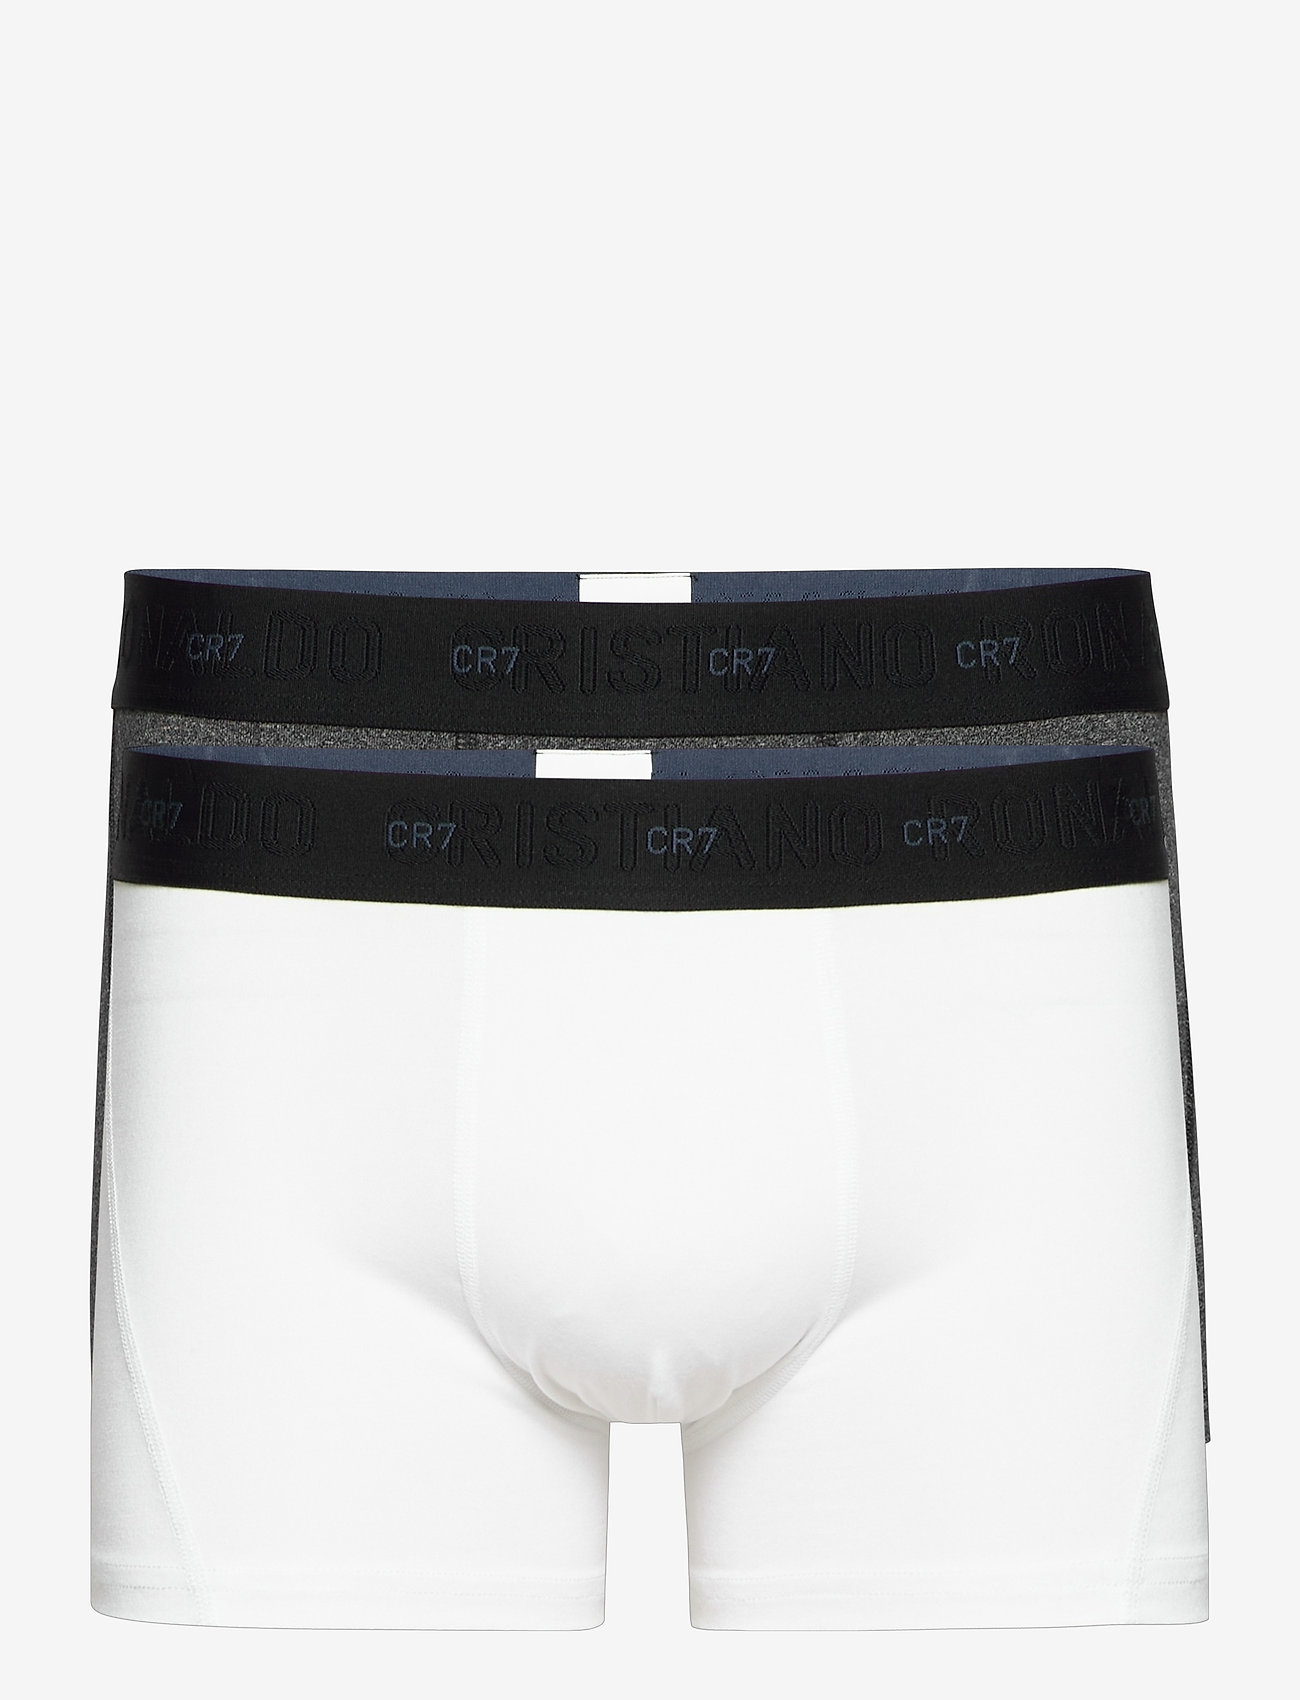 CR7 Cr7 Bamboo, Trunk 2-pack - Boxers | Boozt.com